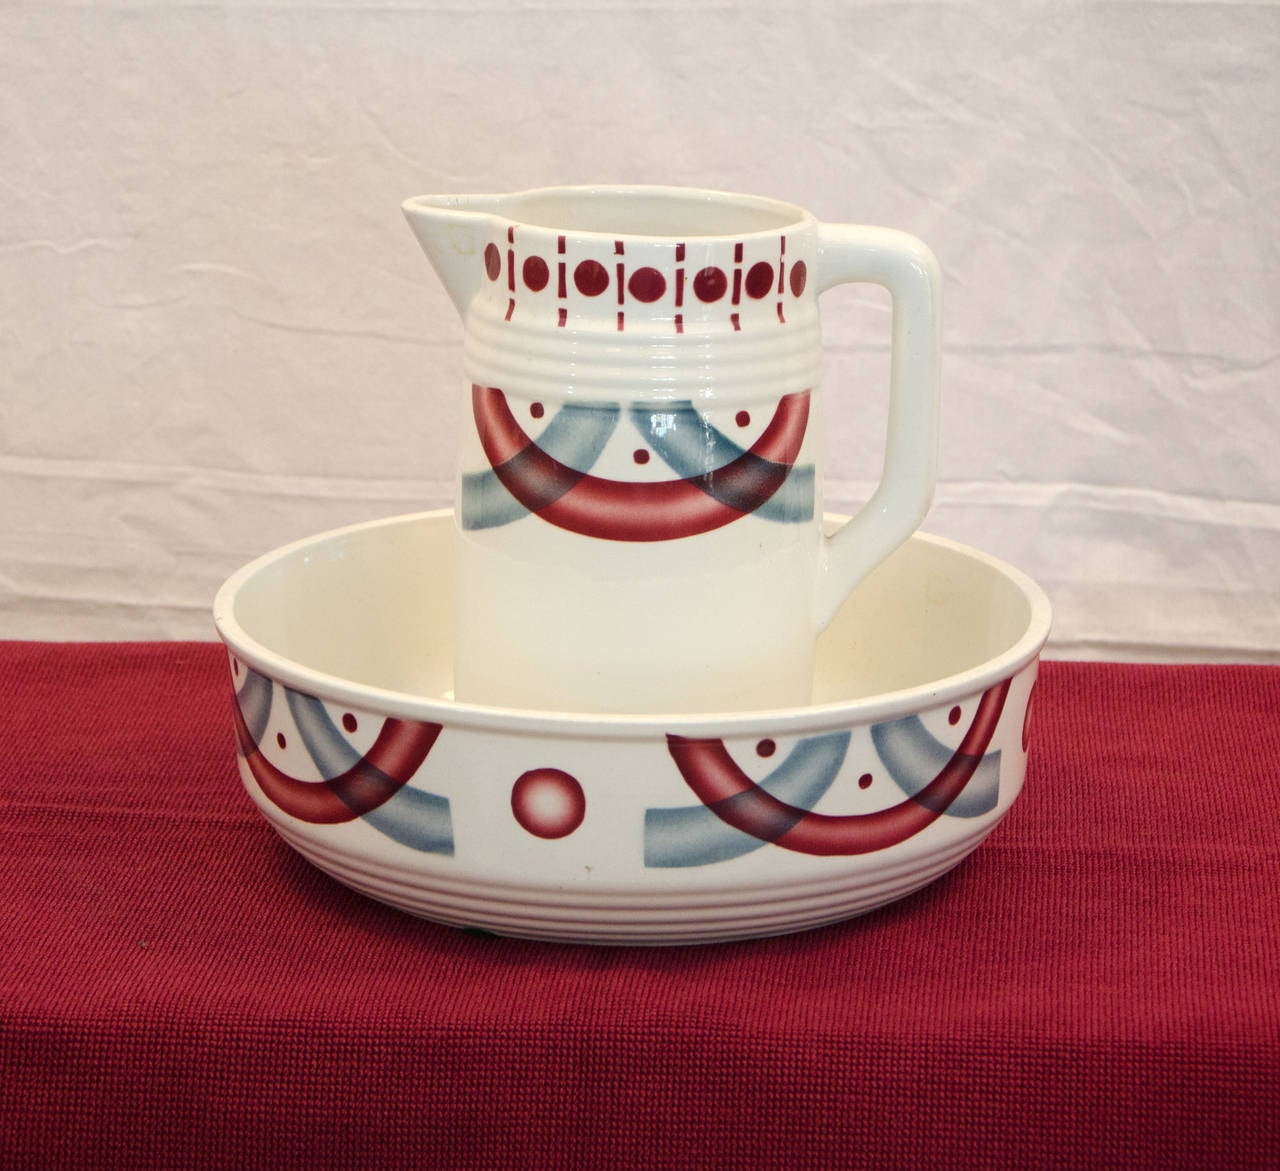 Czechoslovakian ceramic pitcher and bowl set with airbrushed  art deco pattern in a nice gray/blue and cranberry/red color combination. Was used as a washing vessel in bedroom when bathrooms were not as easily accessible.
The pitcher is 5